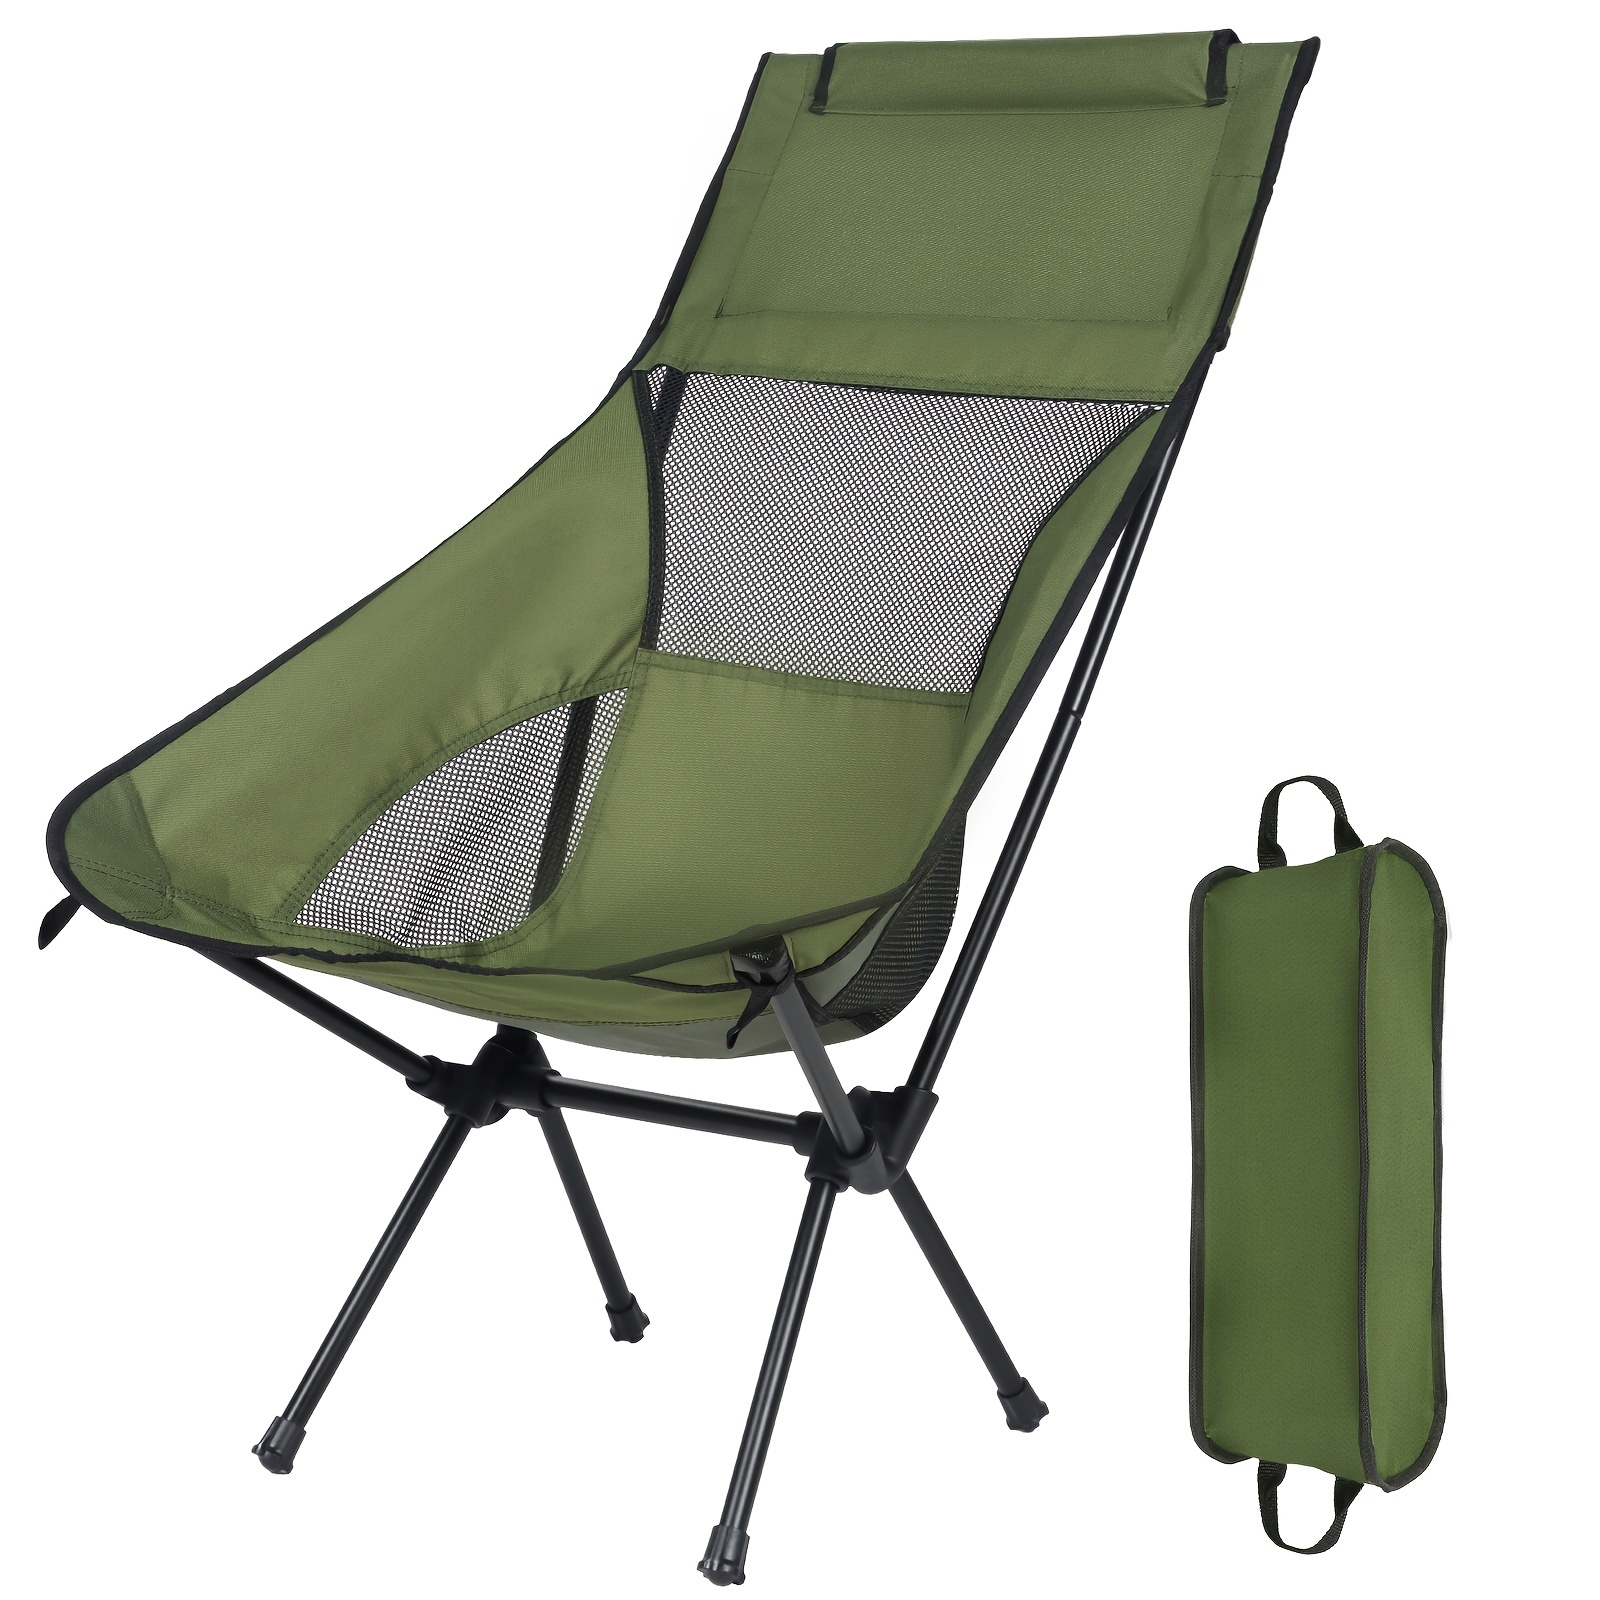 Portable Telescopic Stool For Camping, Travel, Picnic, Beach, Fishing  Retractable Folding Chair With Seat Tarraco 230905 From Pong06, $18.77